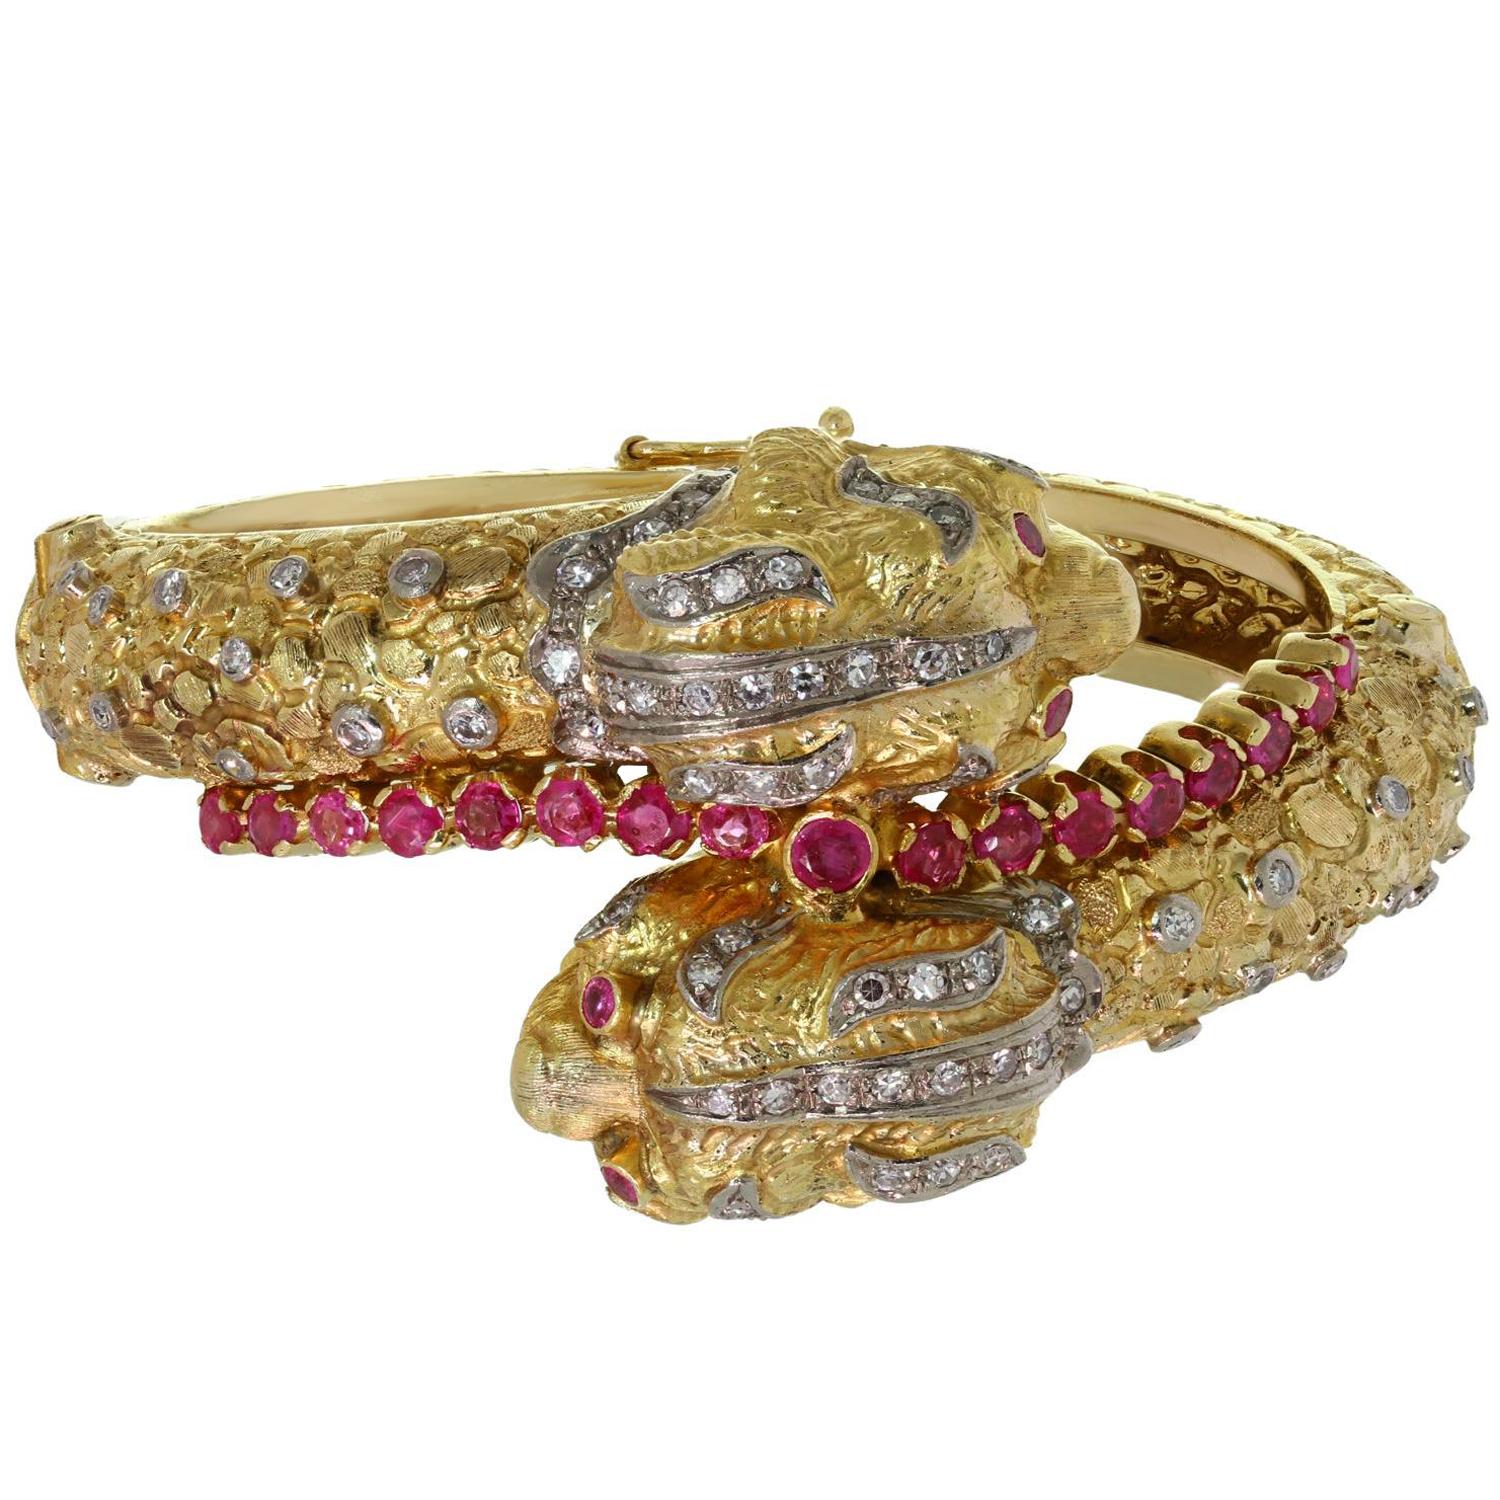 This fabulous Ilias Lalaounis bangle bracelet features a stunning two-headed chimera design crafted in 18k textured yellow gold and set with 21 red rubies weighing an estimated 1.90 carats and 74 round diamonds weighing an estimated 0.90 carats.